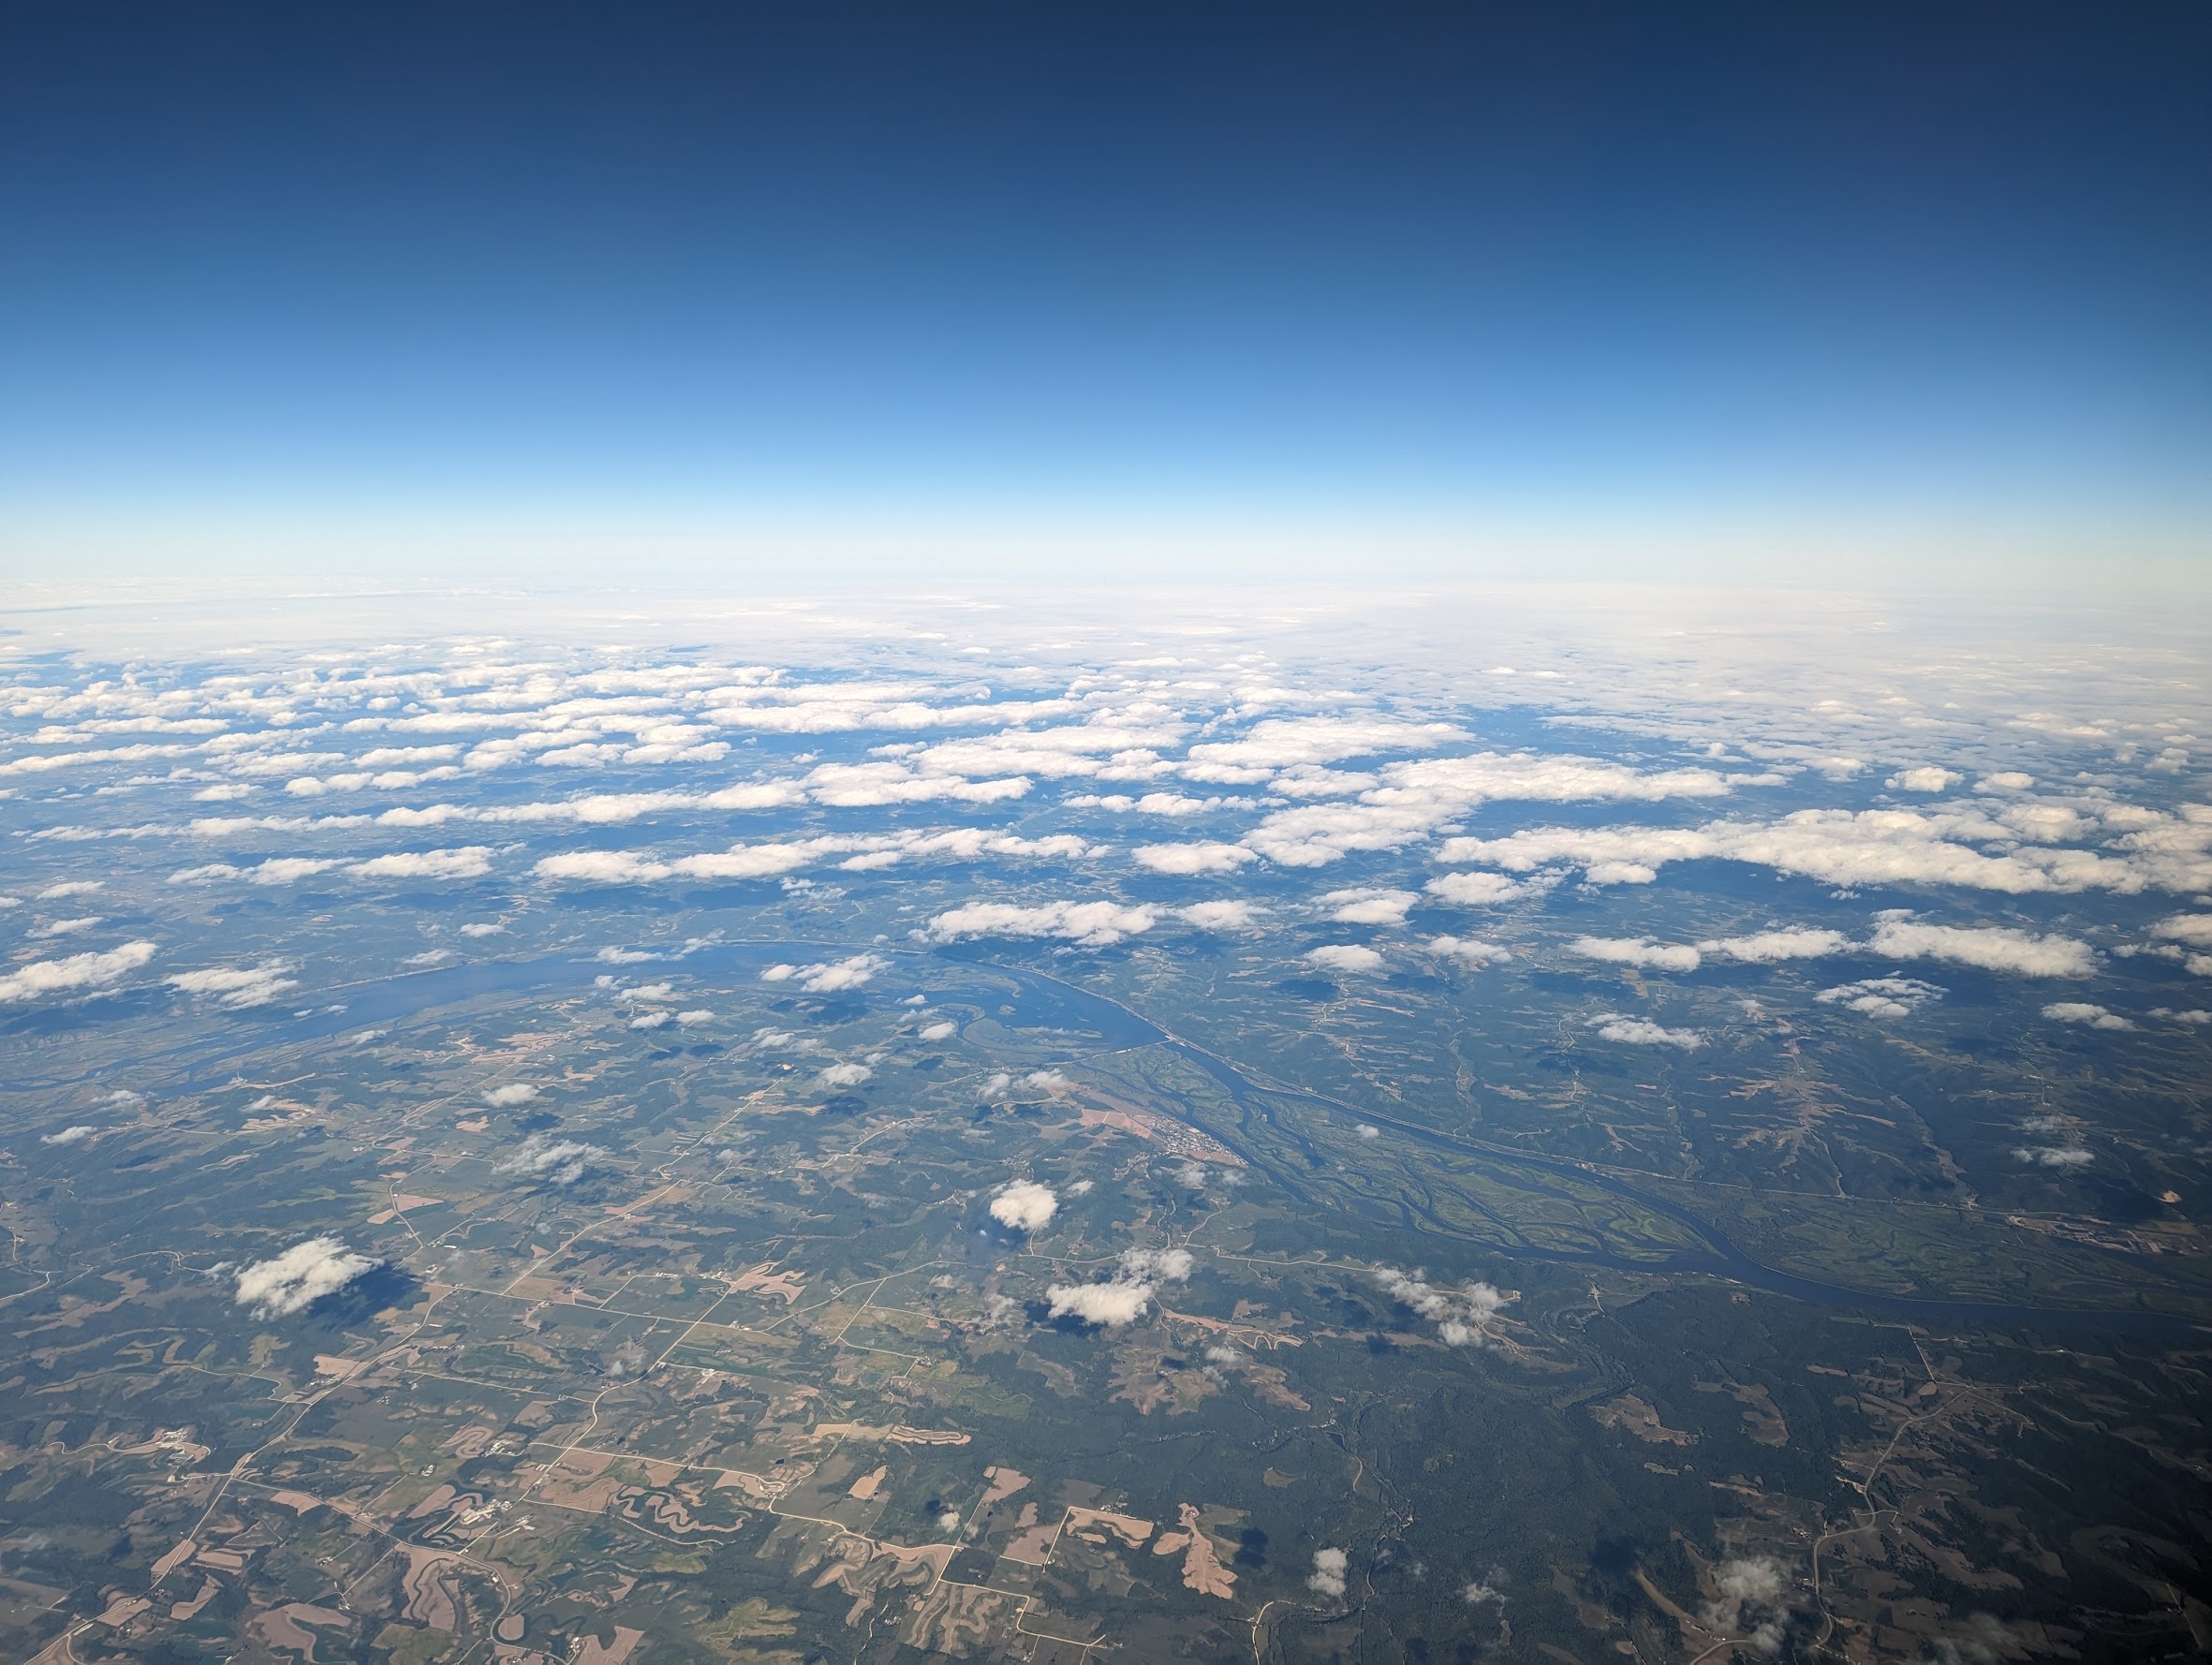 A photograph of clouds above earth taken from an airplane. The clouds form a striped pattern across the sky.